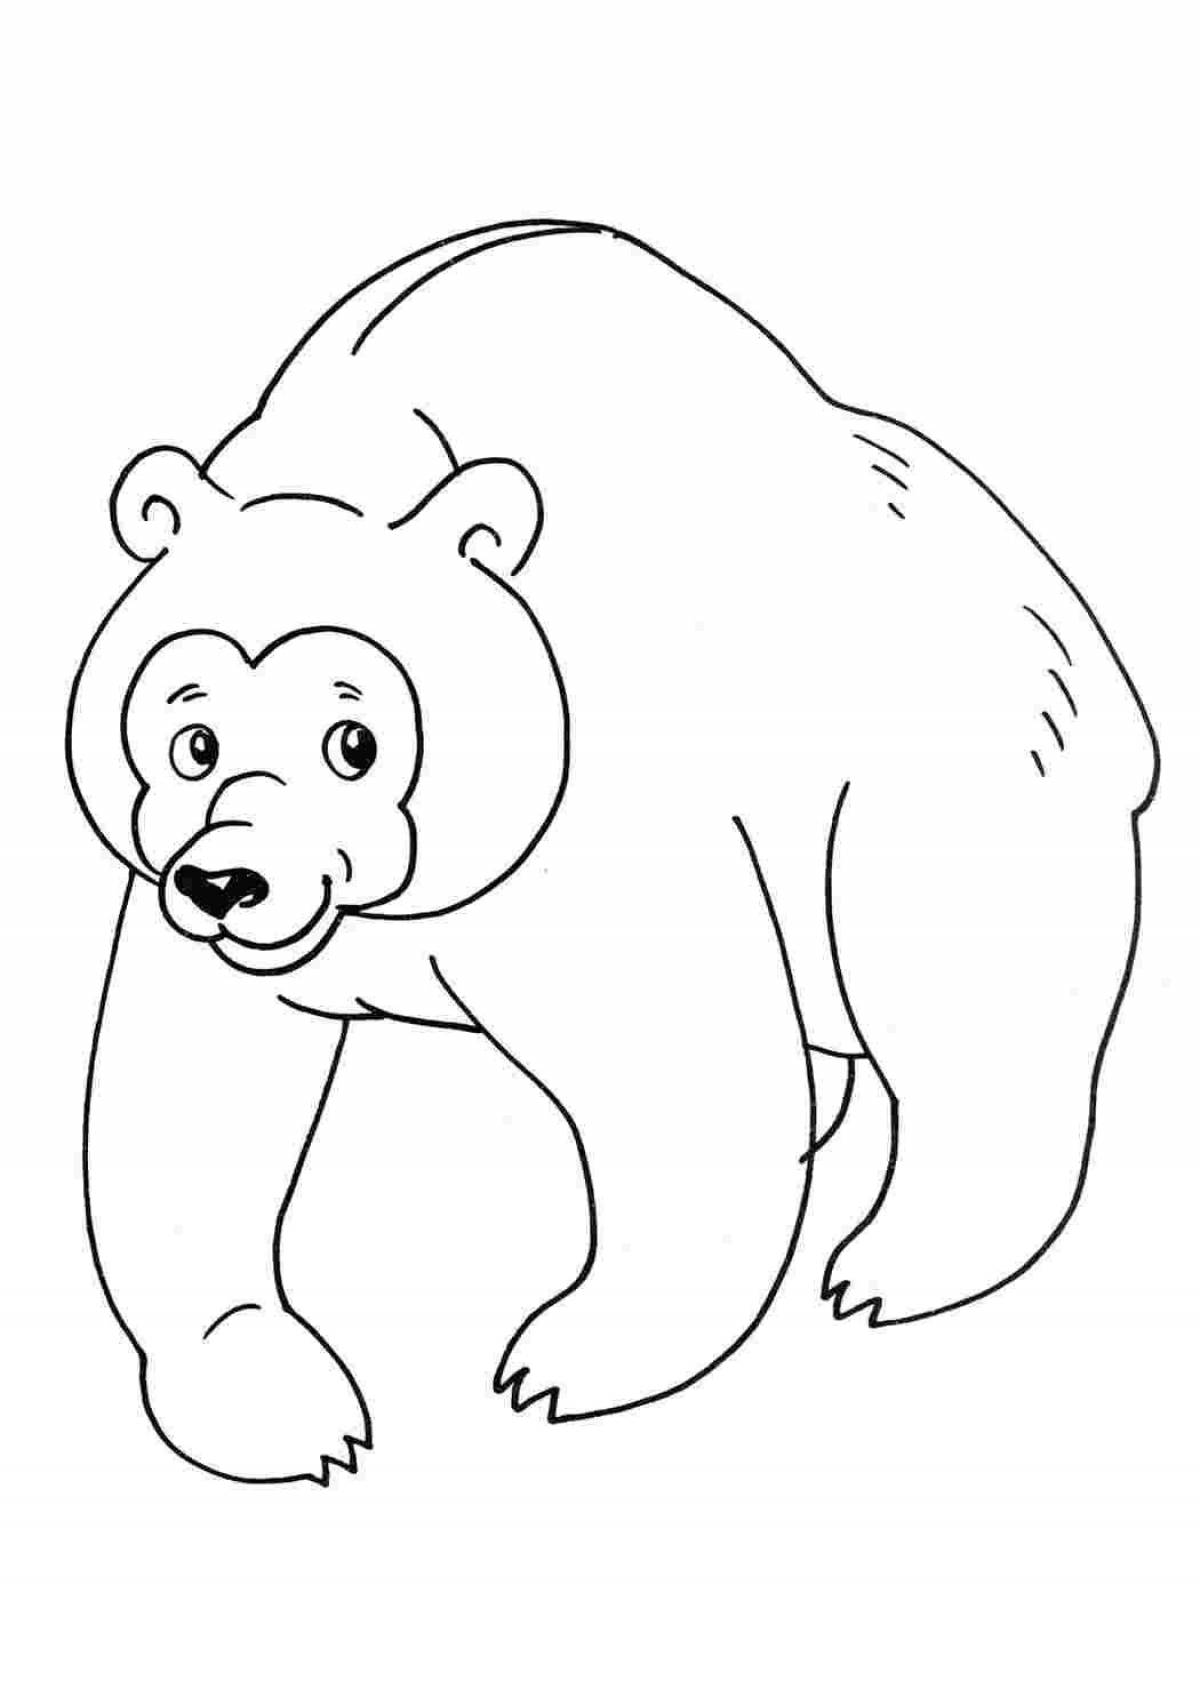 Coloring book happy brown bear for kids